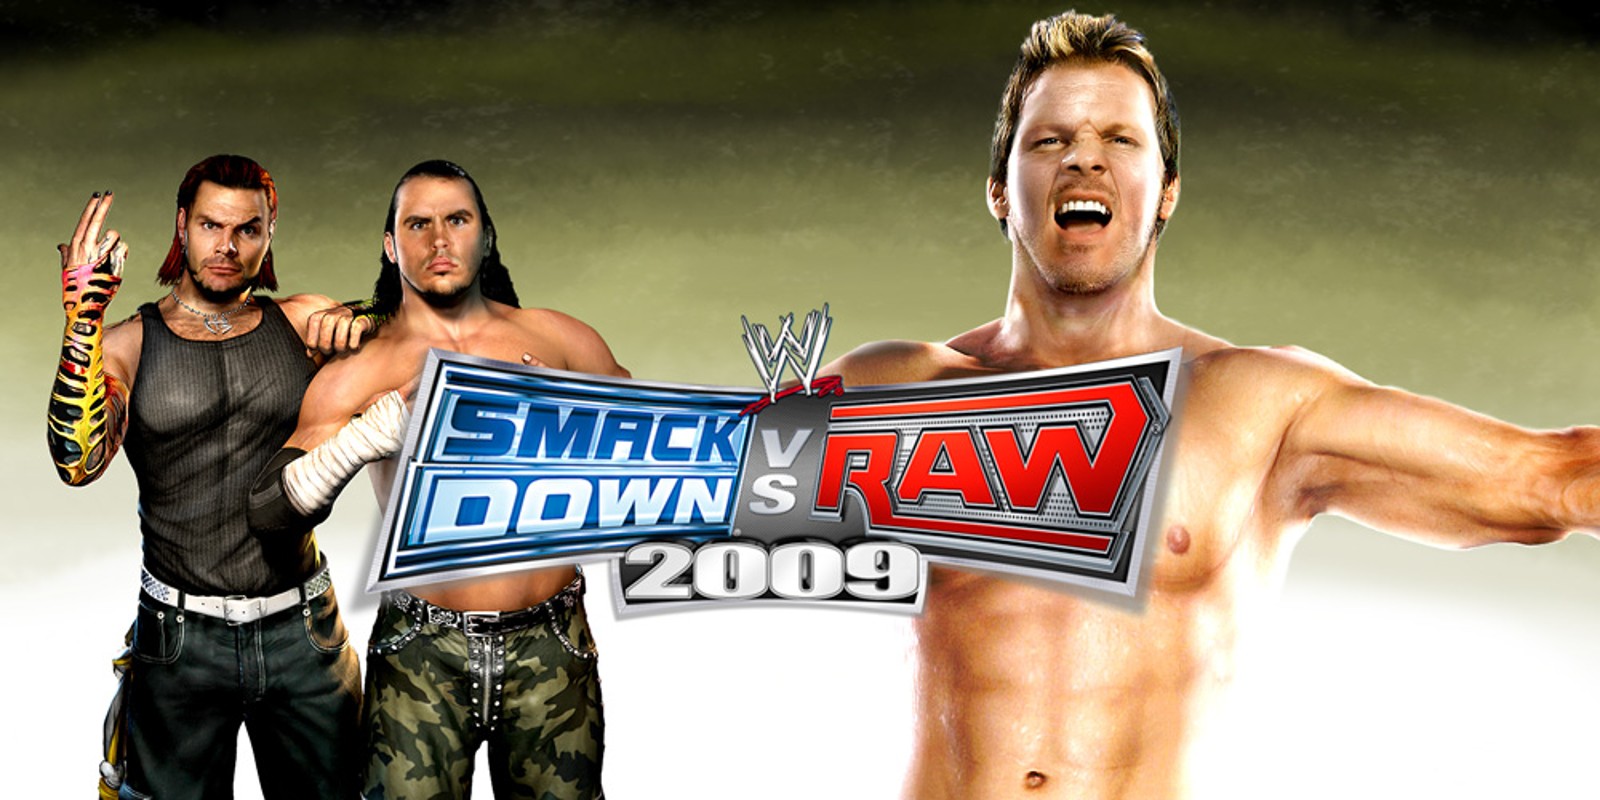 WWE Smackdown Vs Raw 2009 Game Free Download